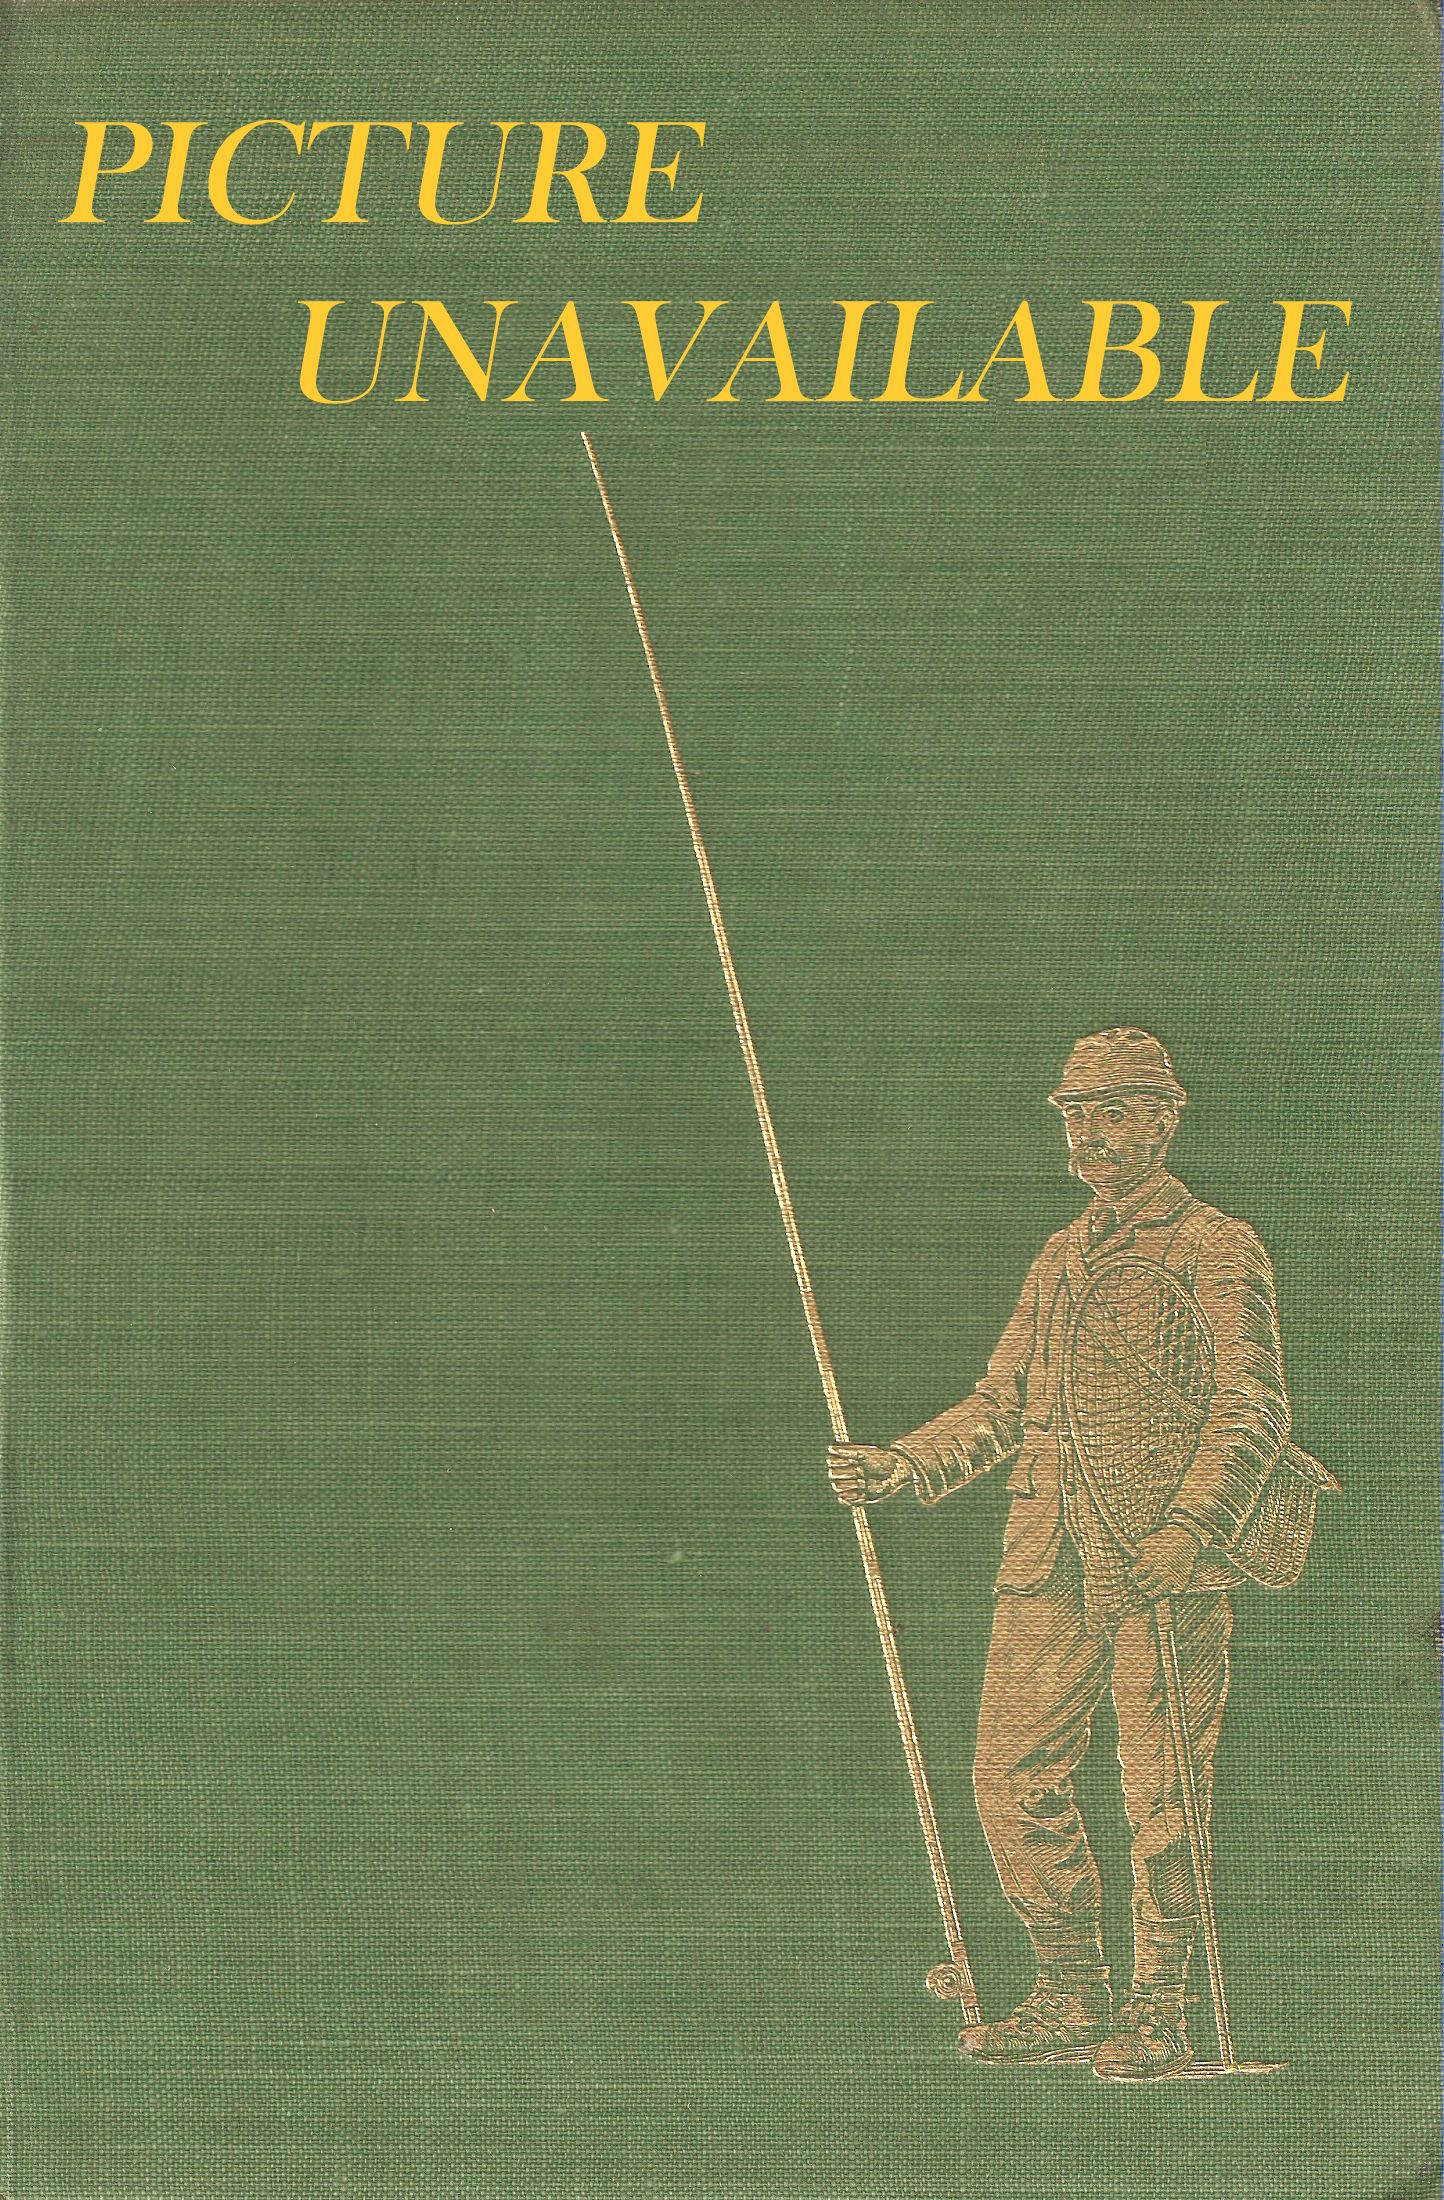 ROD BUILDING FOR AMATEURS. By Richard Walker. 1961 3rd edition.